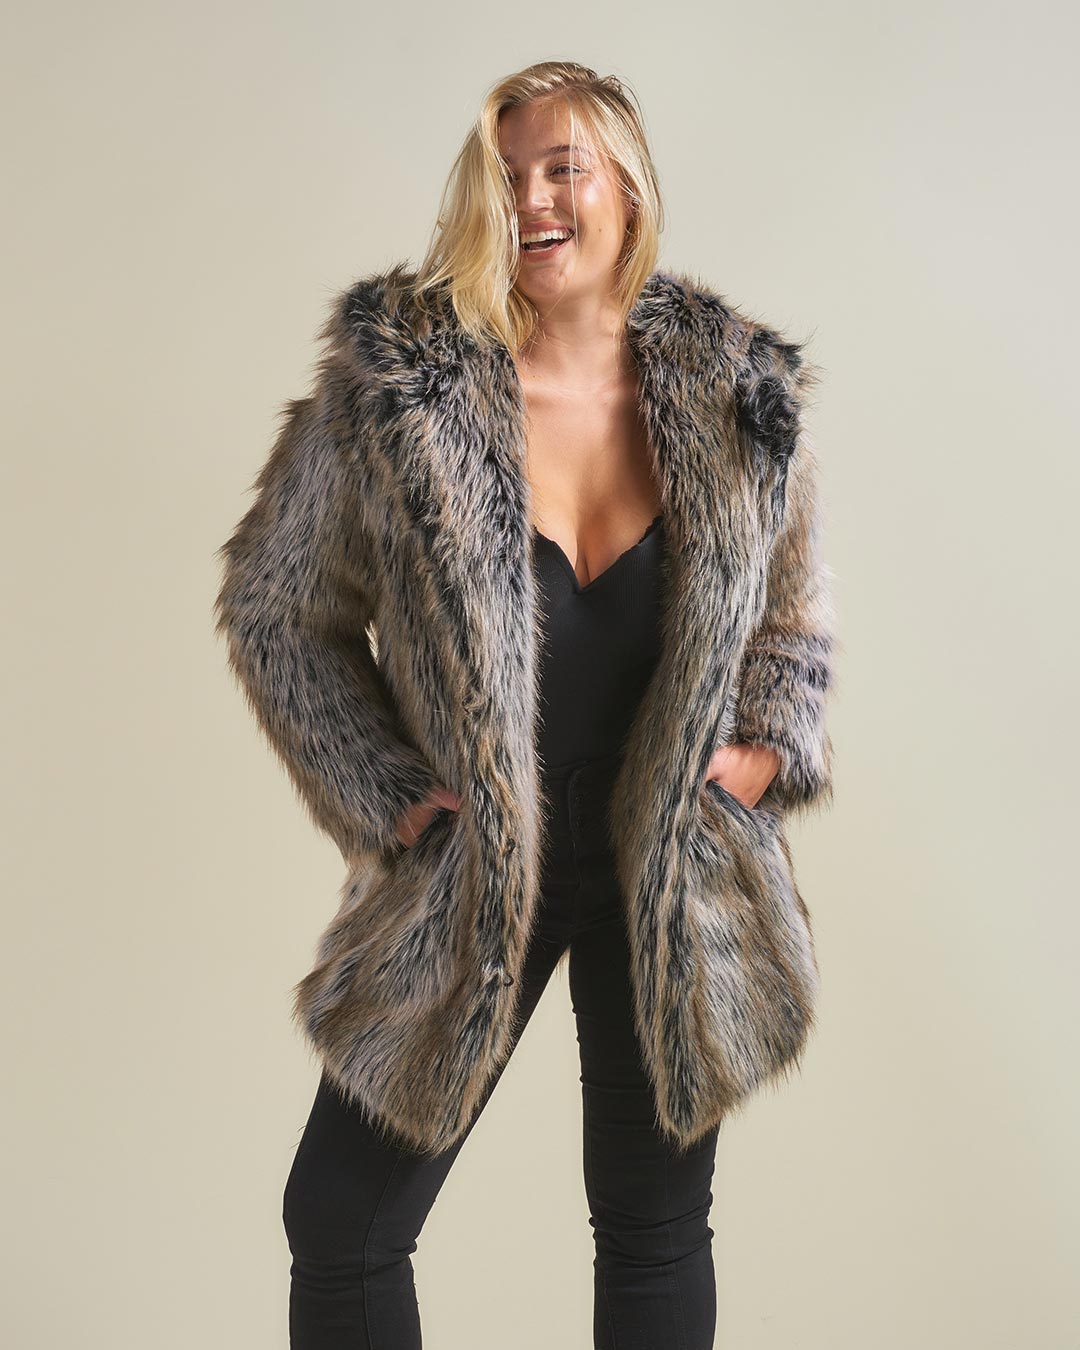 Blonde woman wearing Grey Wolf Classic Faux Fur Coat by SpiritHoods. Her hands are in her pocket.